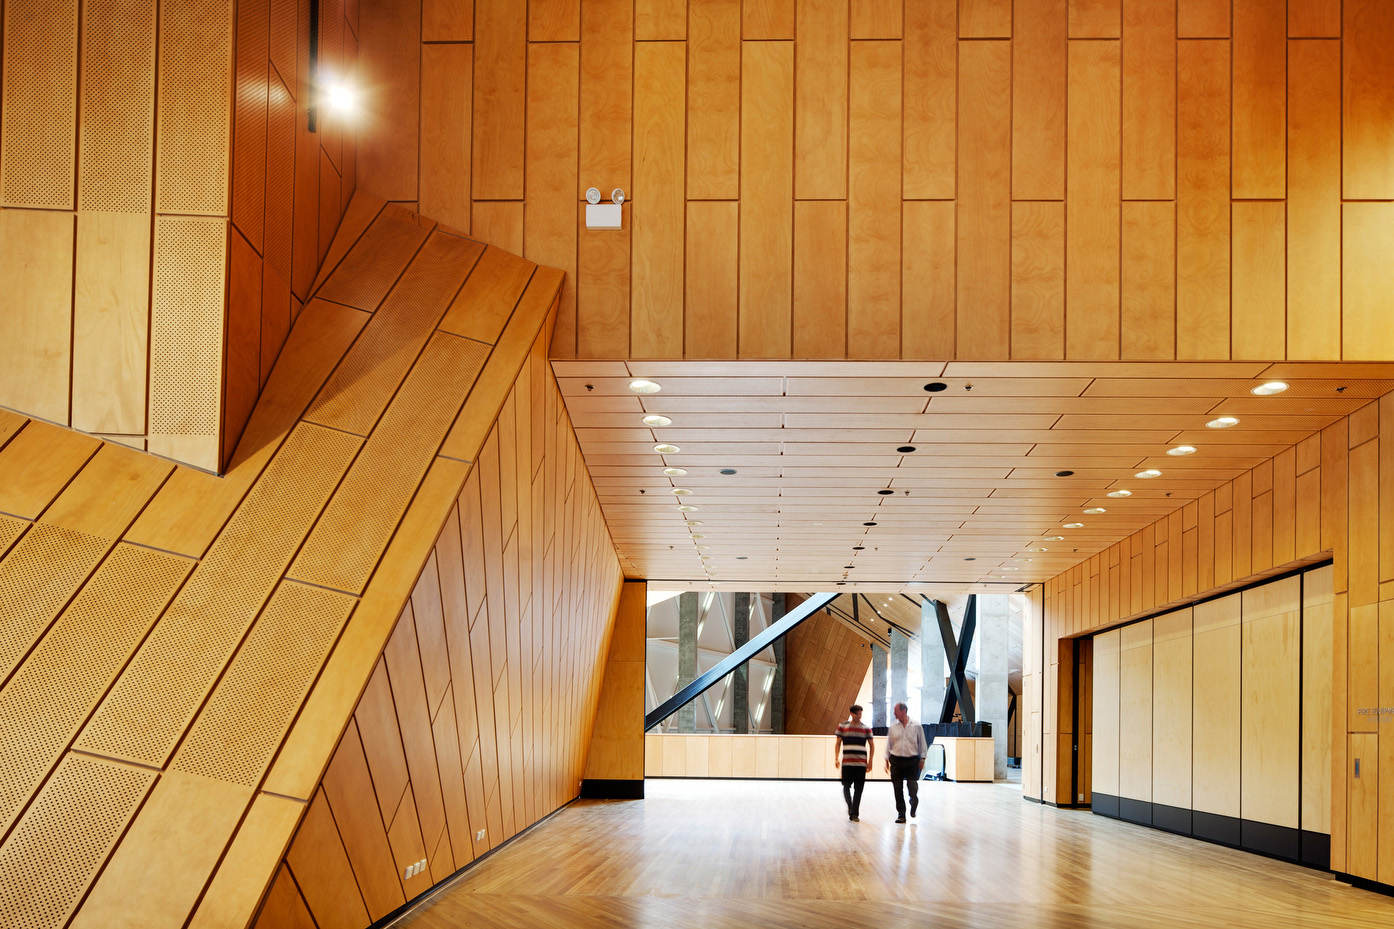 Perth Arena interior panelling by Stylewoods